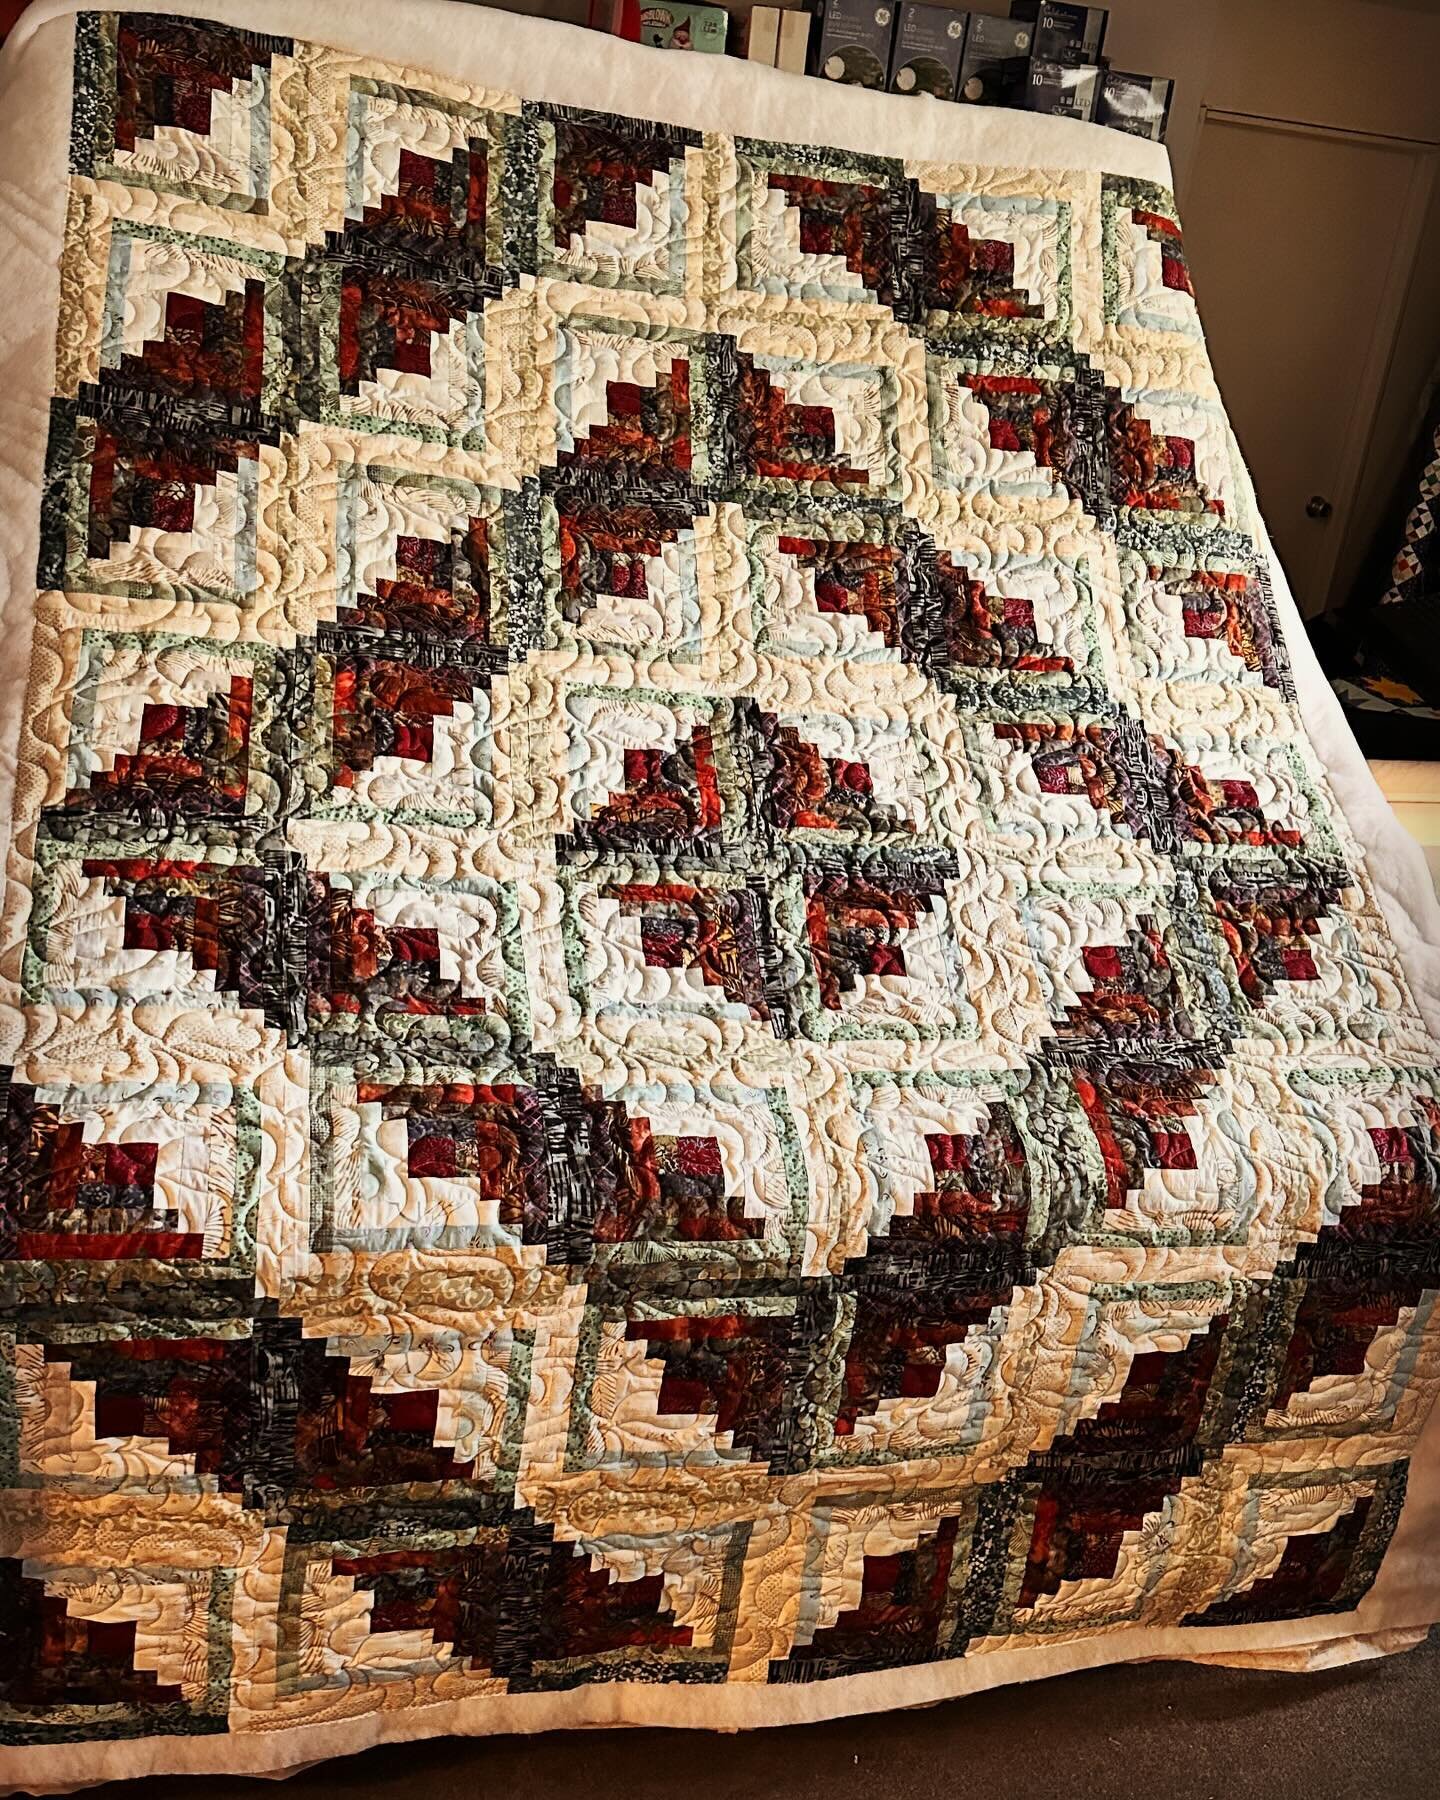 This beauty was a rush for a wedding and&hellip; we made a new quilty friend.🥰 Thanks for letting us help you out Bonnie bonniesmith6110 ❣️ You were fun &amp; you&rsquo;re a wonderful quilter with great taste.😍 We quilted it with a design called Or